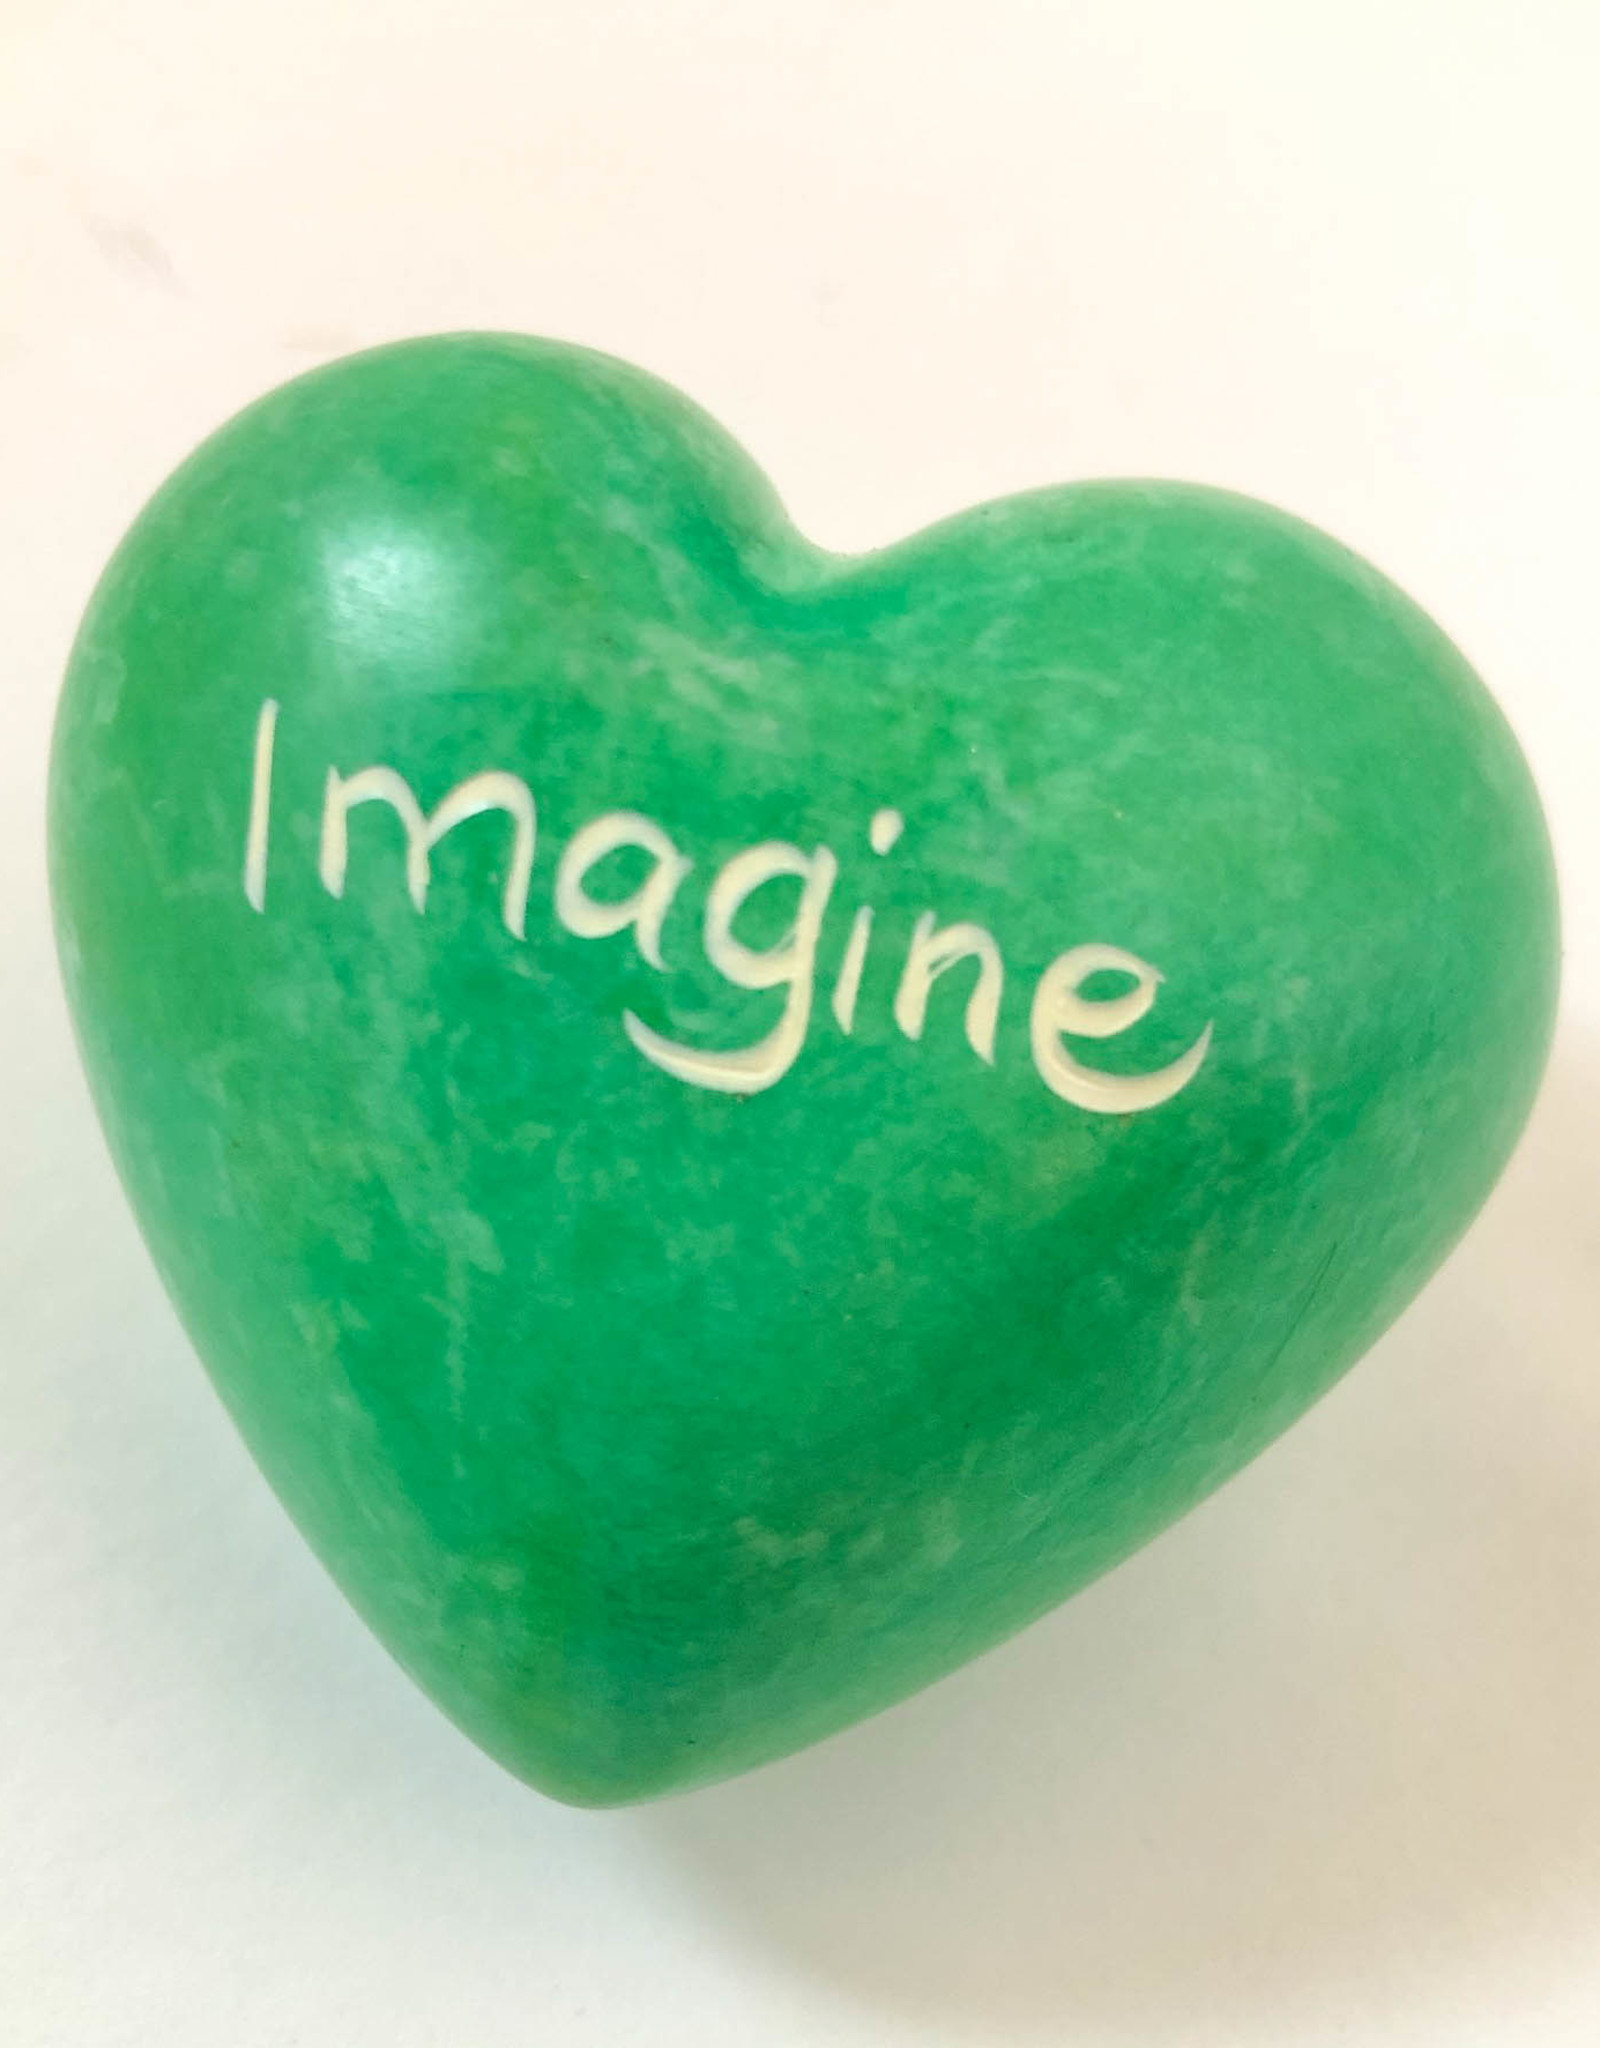 Venture Imports Word Hearts - Imagine, Lime Green